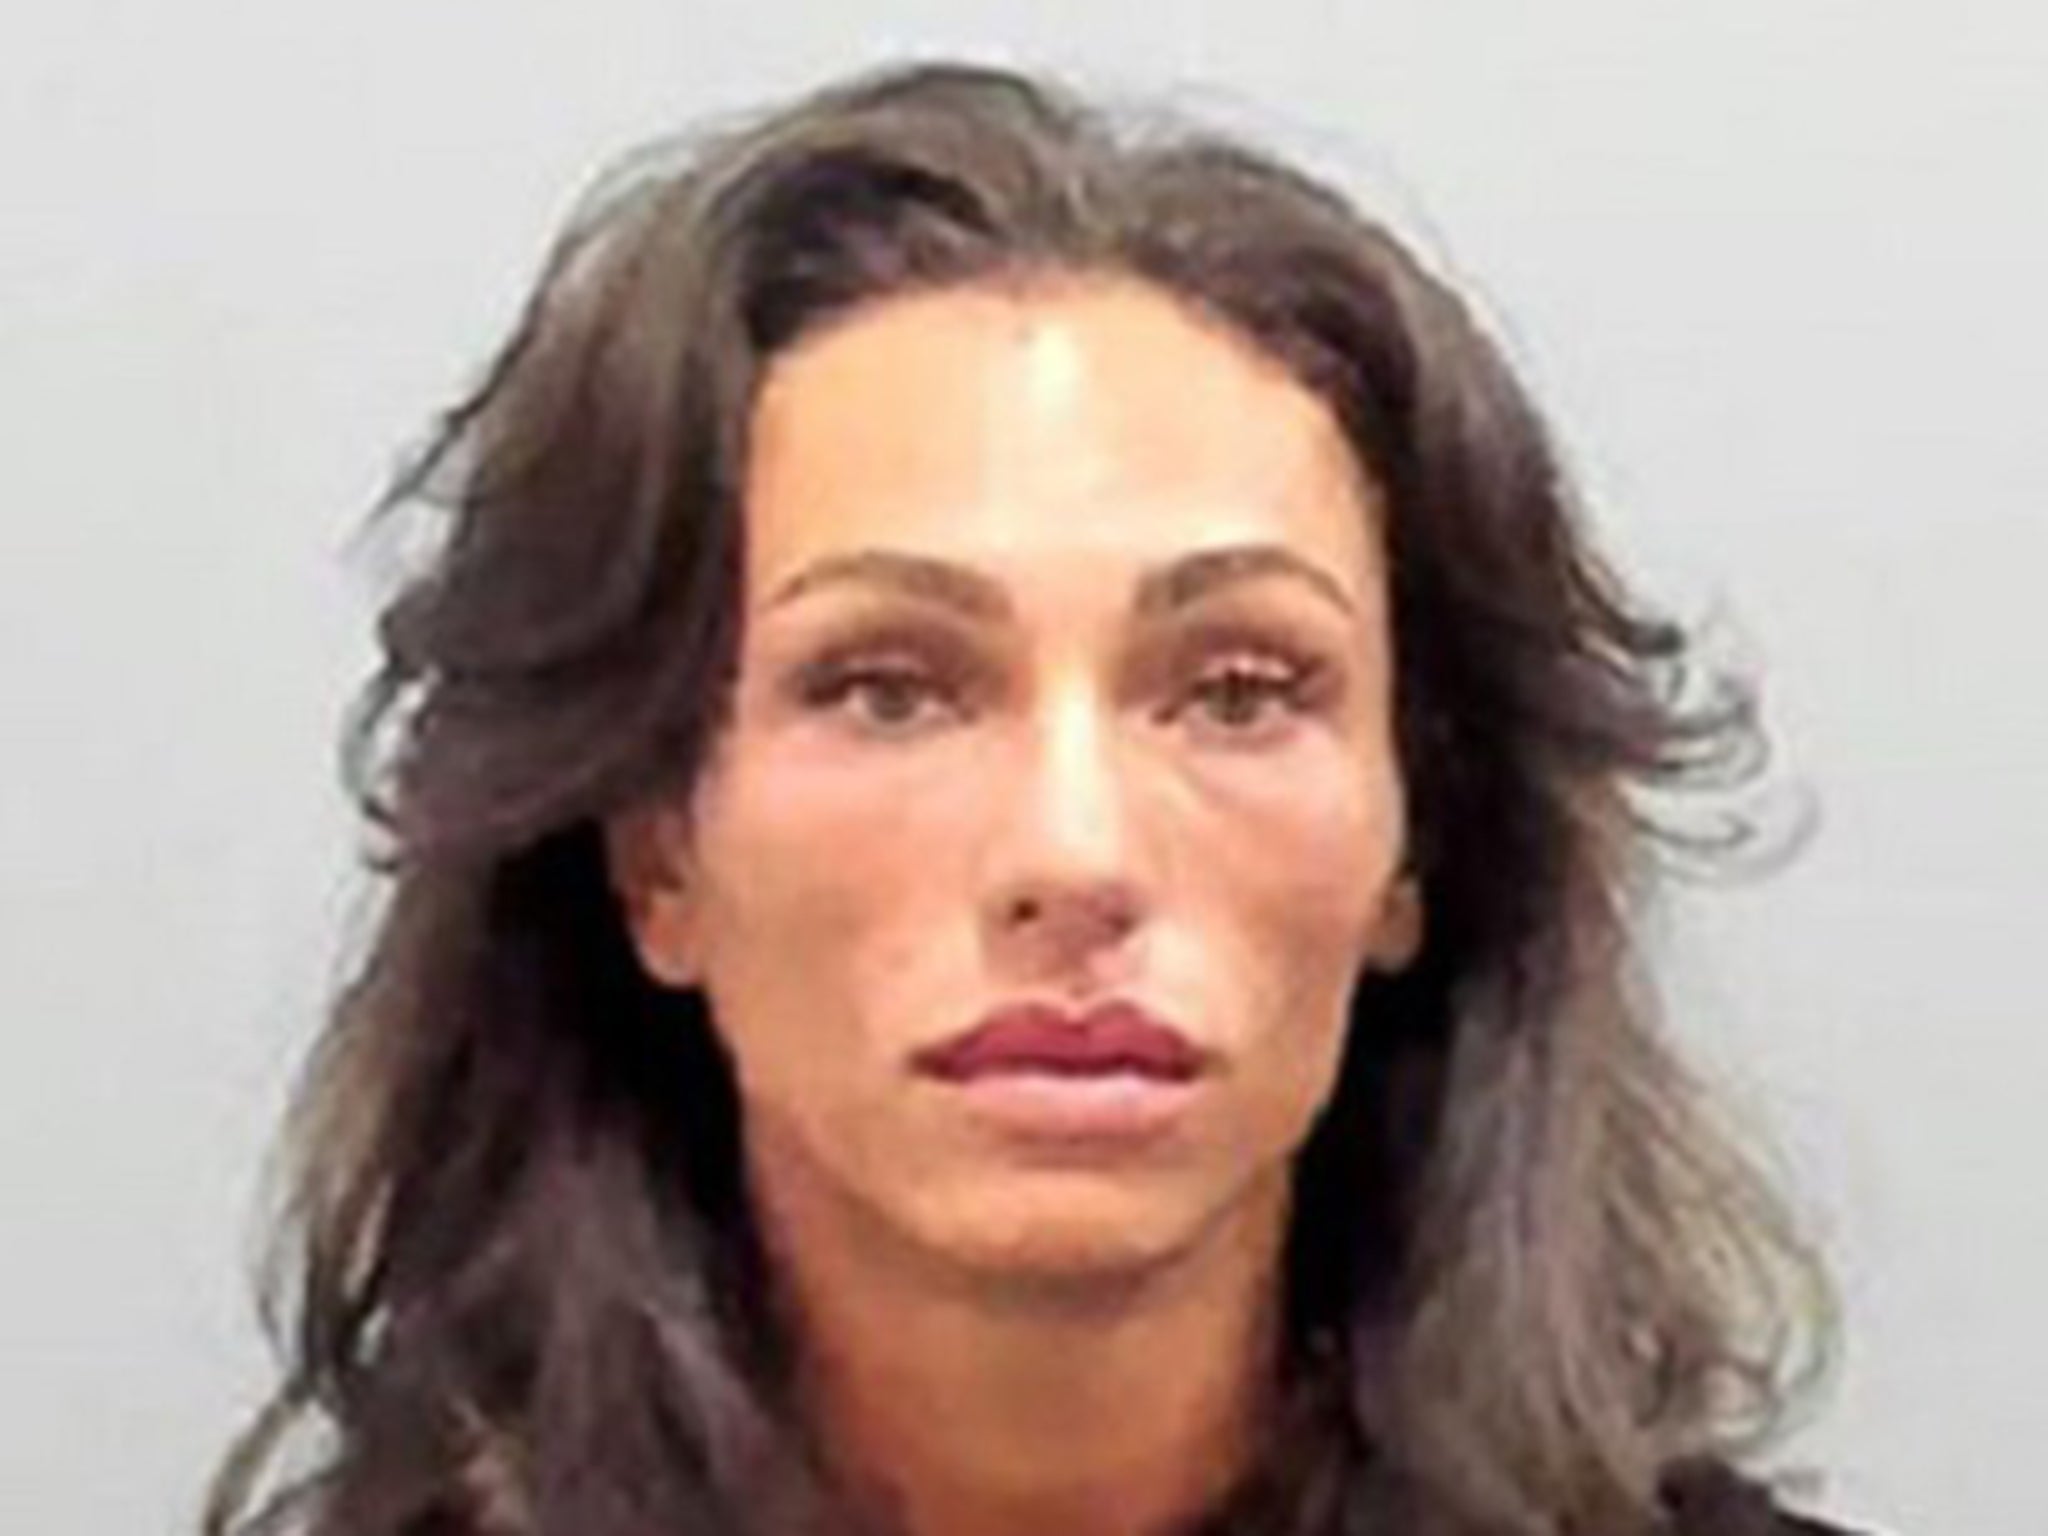 Melissa Kate Bumstead has been arrested in Florida on charges relating to illegal steroids, say police.